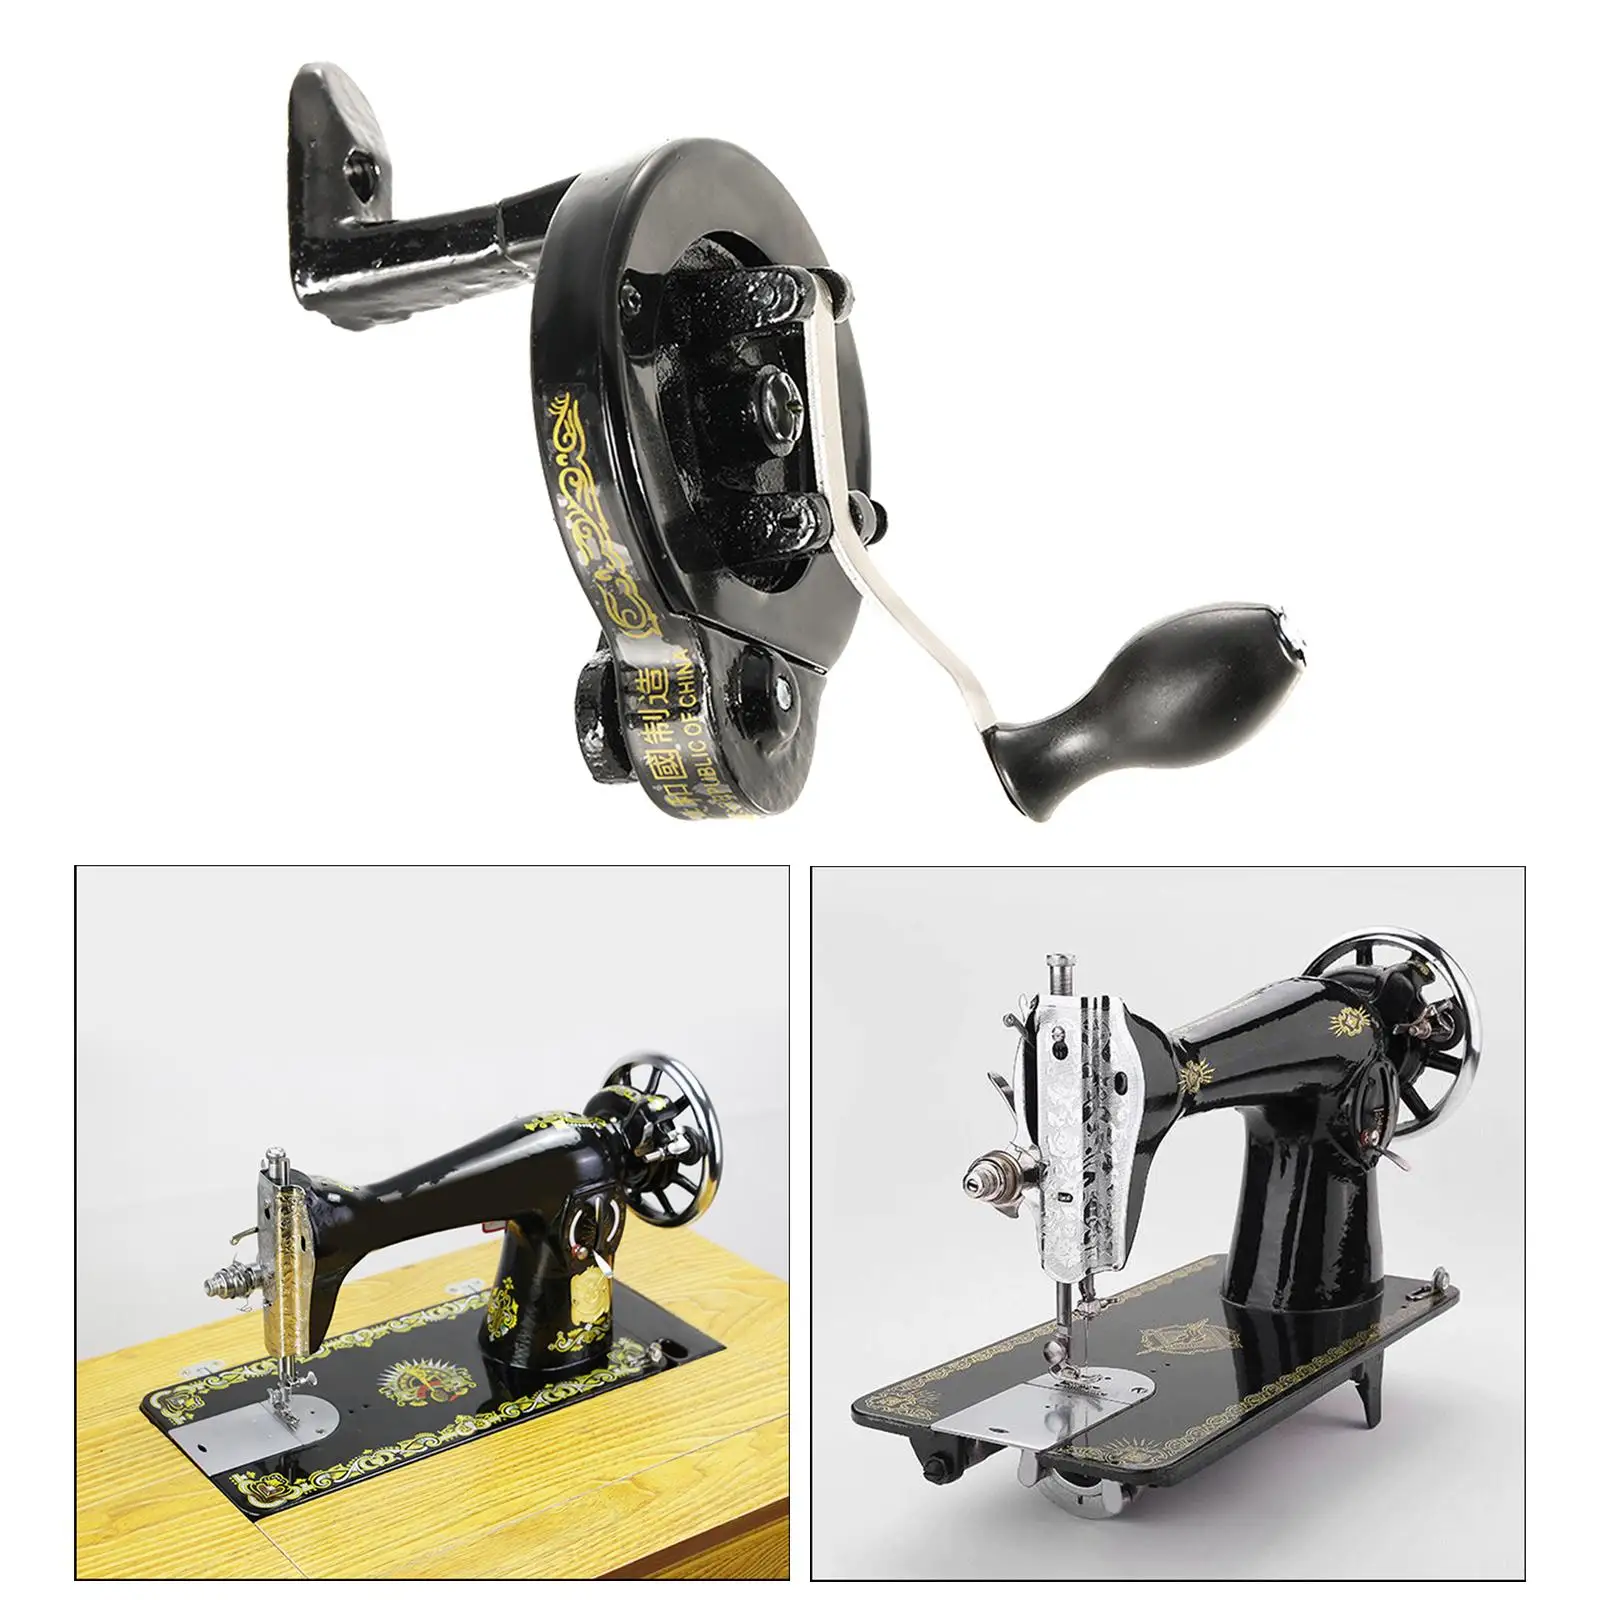 Metal Household Sewing Machine Hand Crank Handcrank Needles Crafts Sew Accessories Replace Handle Tool for Old Sewing Machines